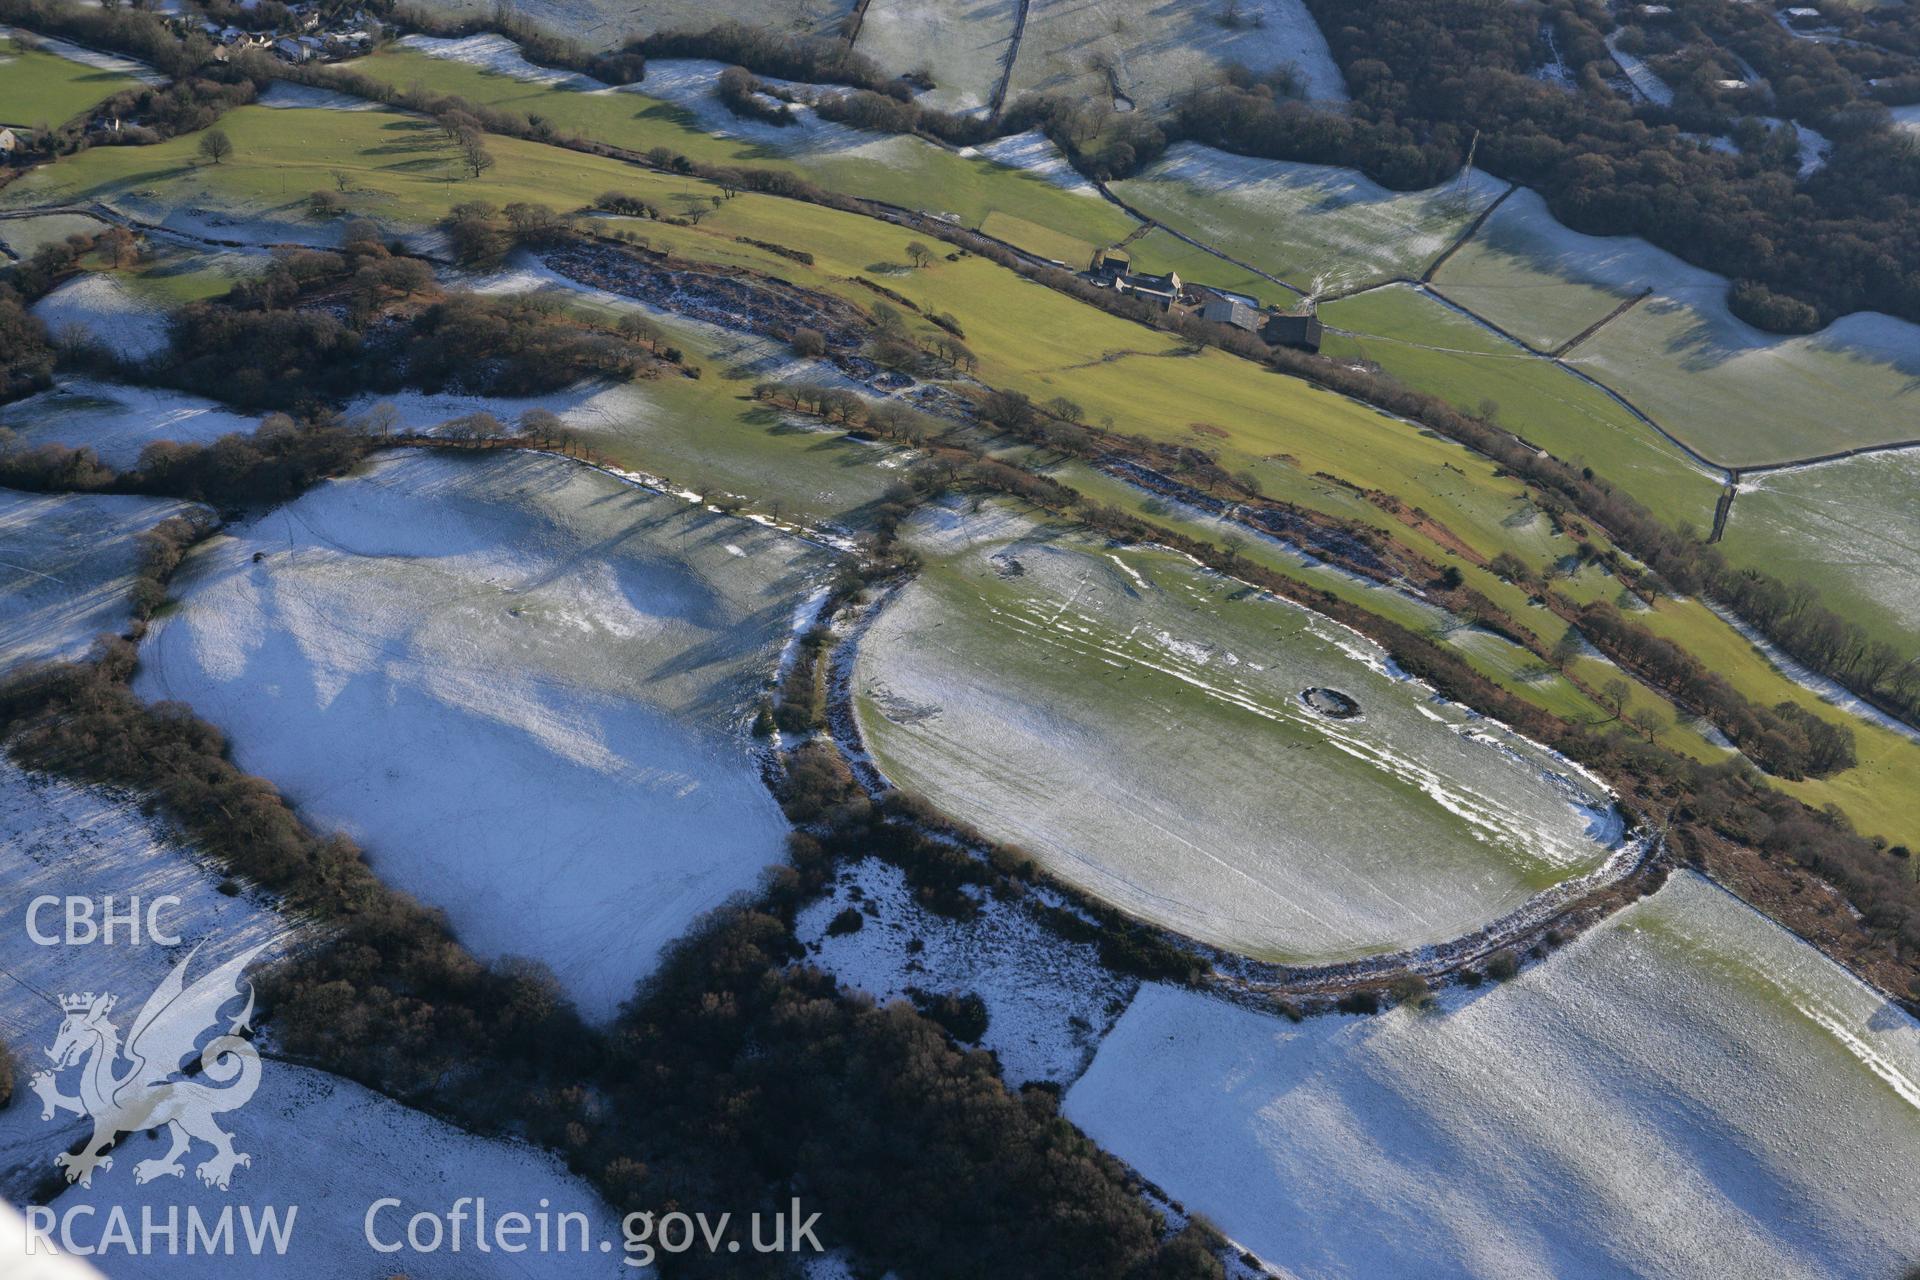 RCAHMW colour oblique photograph of Caerau hillfort. Taken by Toby Driver on 08/12/2010.